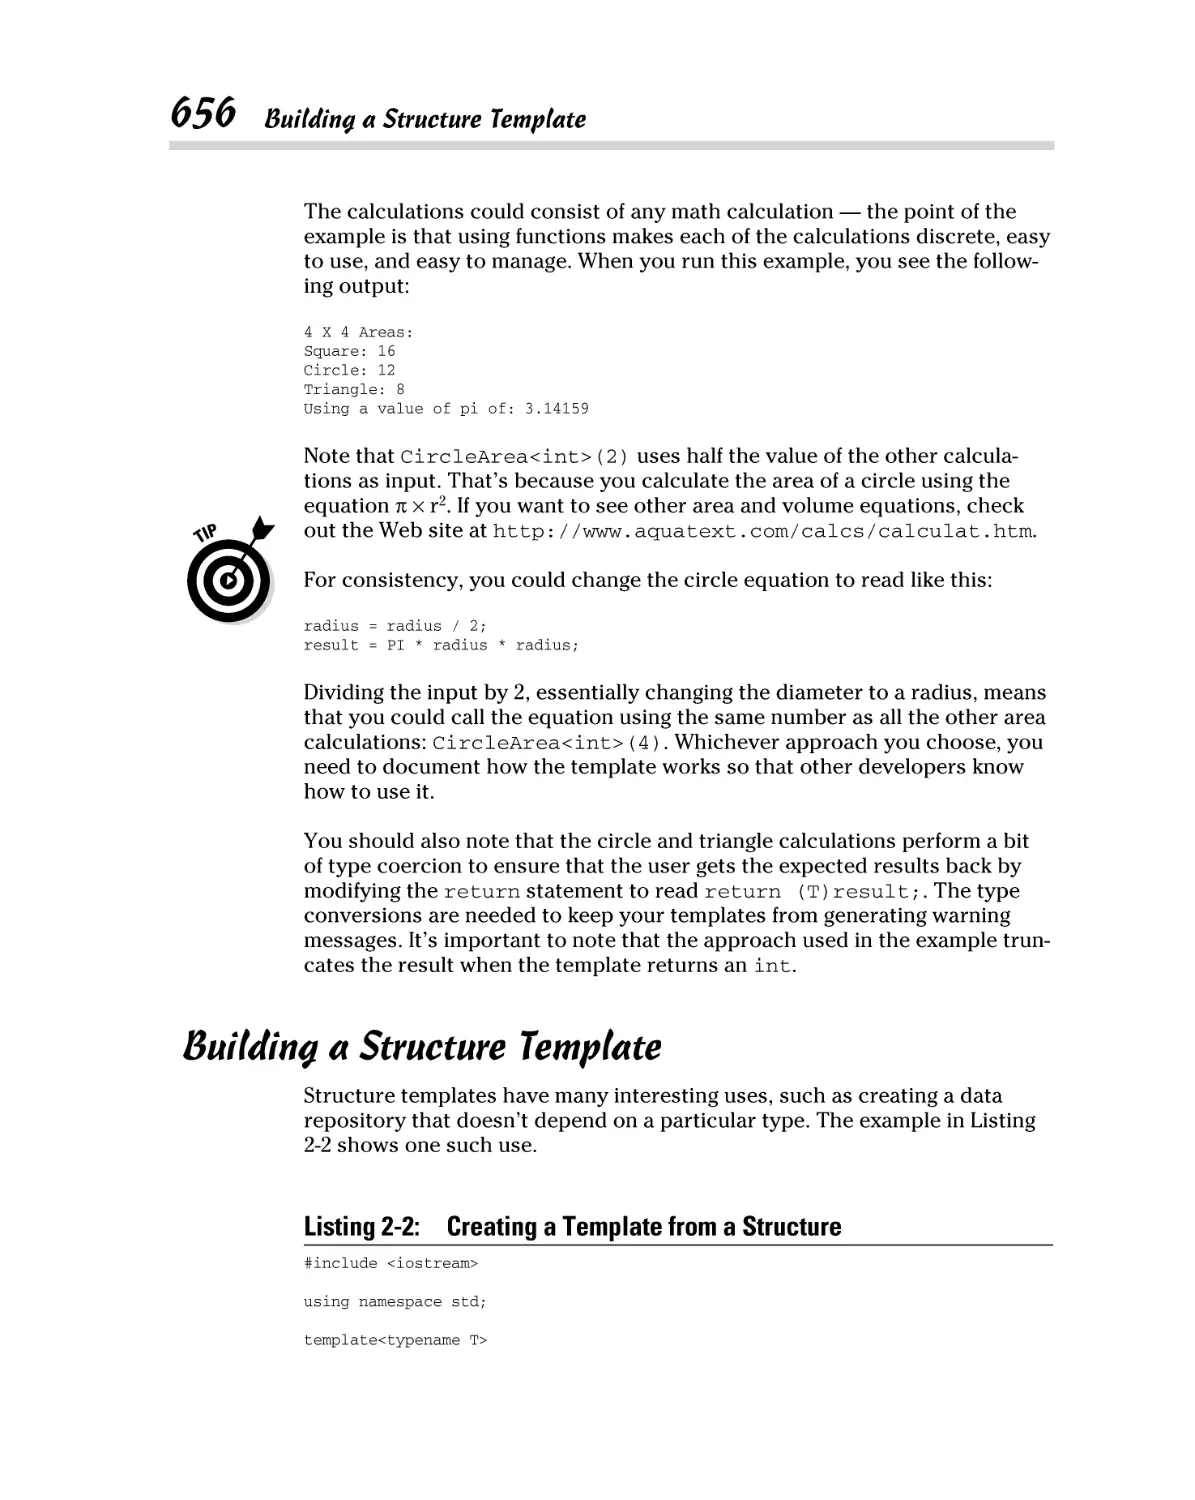 Building a Structure Template